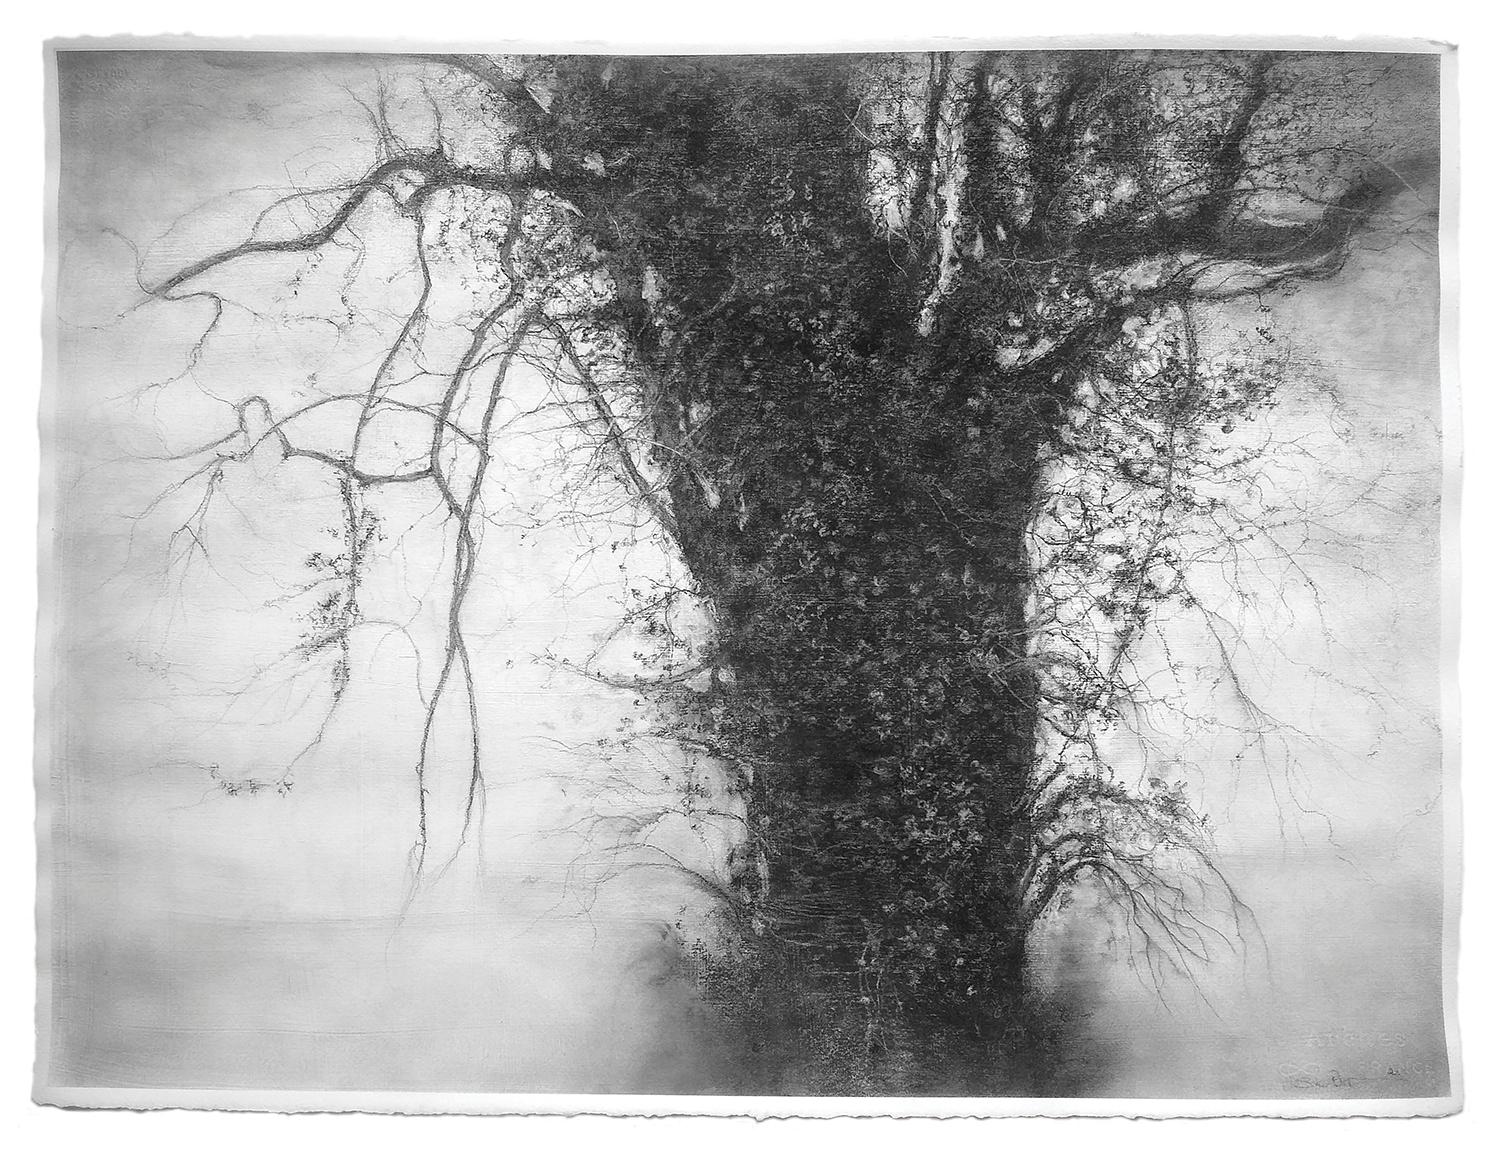 Beneath The Dripping Trees (Realistic Black & White Charcoal Landscape Drawing) - Gray Figurative Art by Sue Bryan